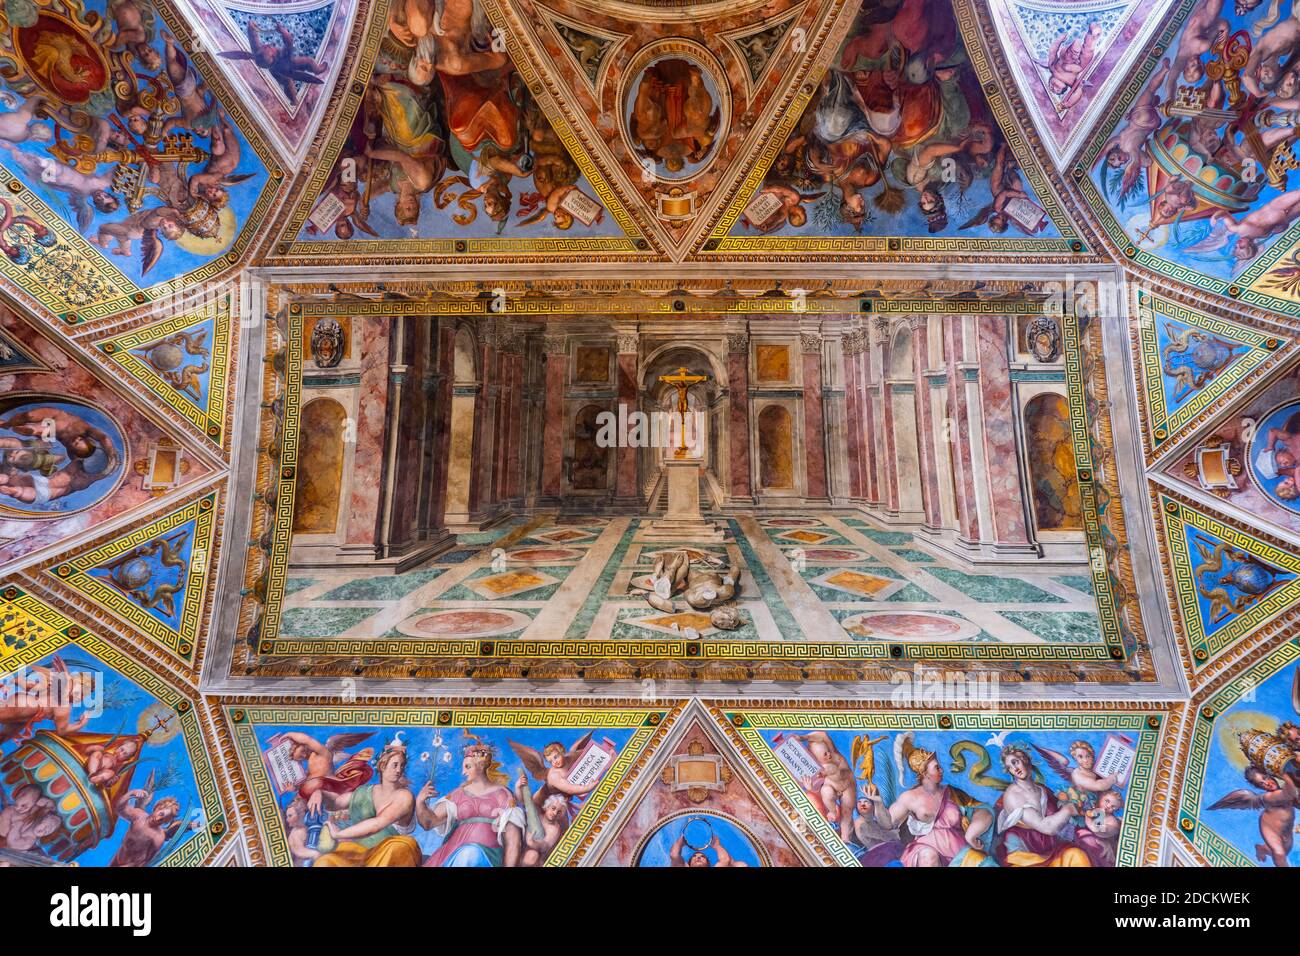 Room of Constantine ceiling with painting Triumph of Christian religion Tommaso Laureti in Raphael Rooms, Vatican Museums, Rome, Italy Stock Photo